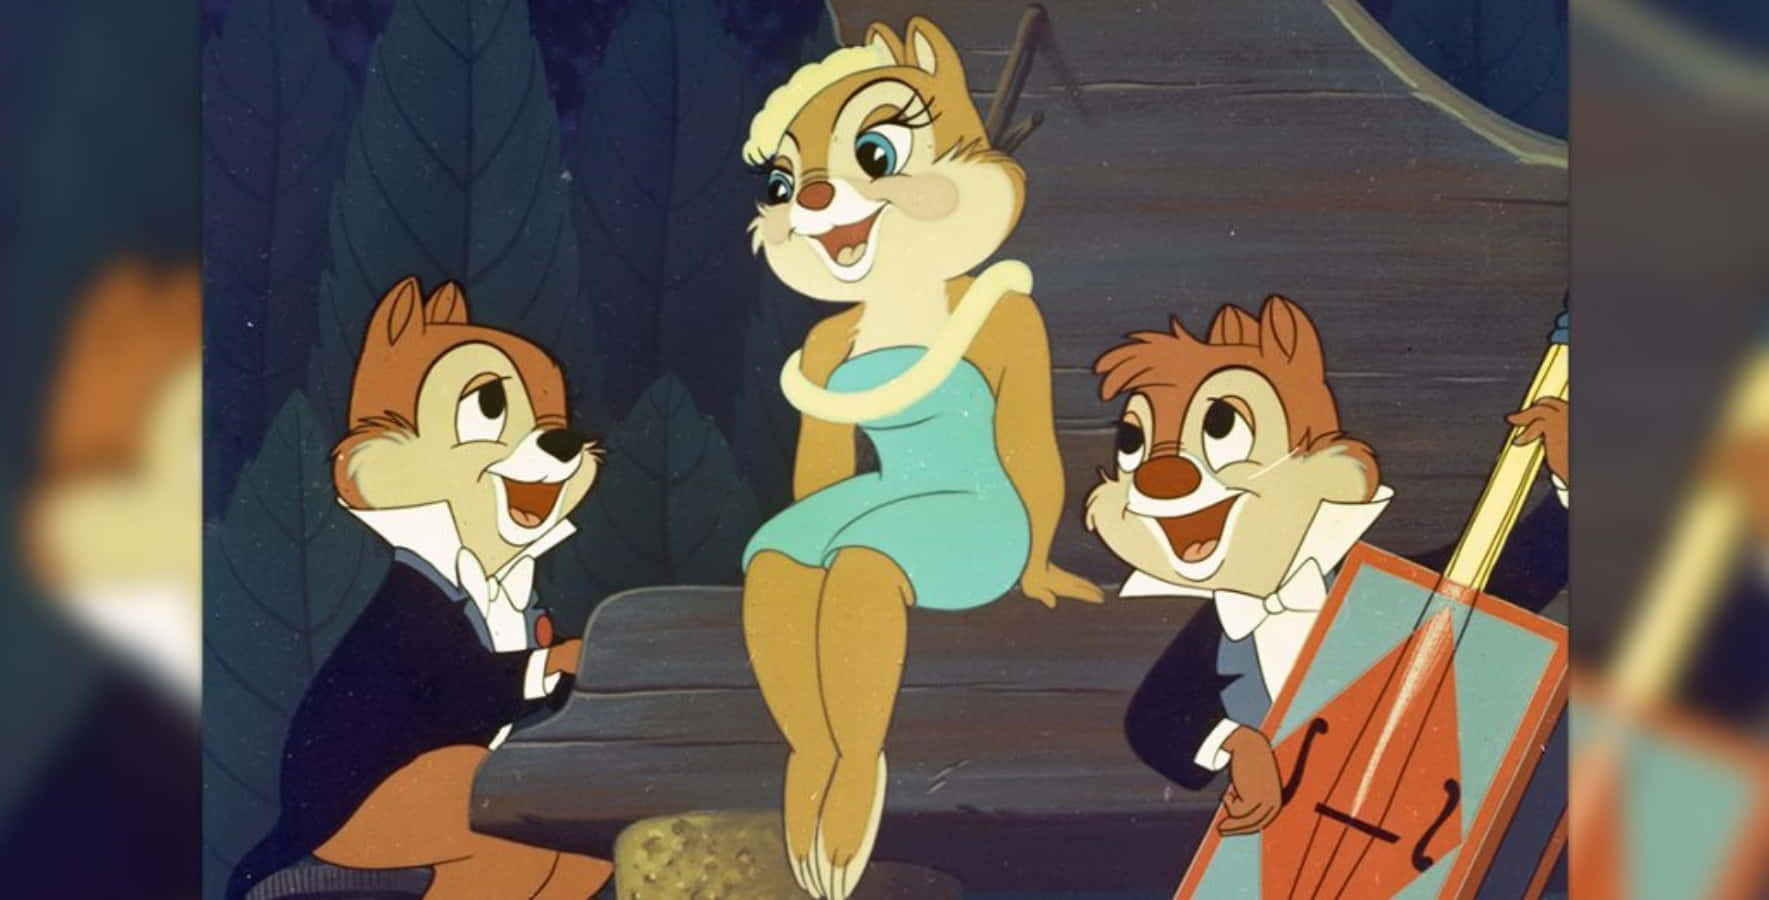 "Chip 'n' Dale, the dynamic duo of fun and mischievousness!"